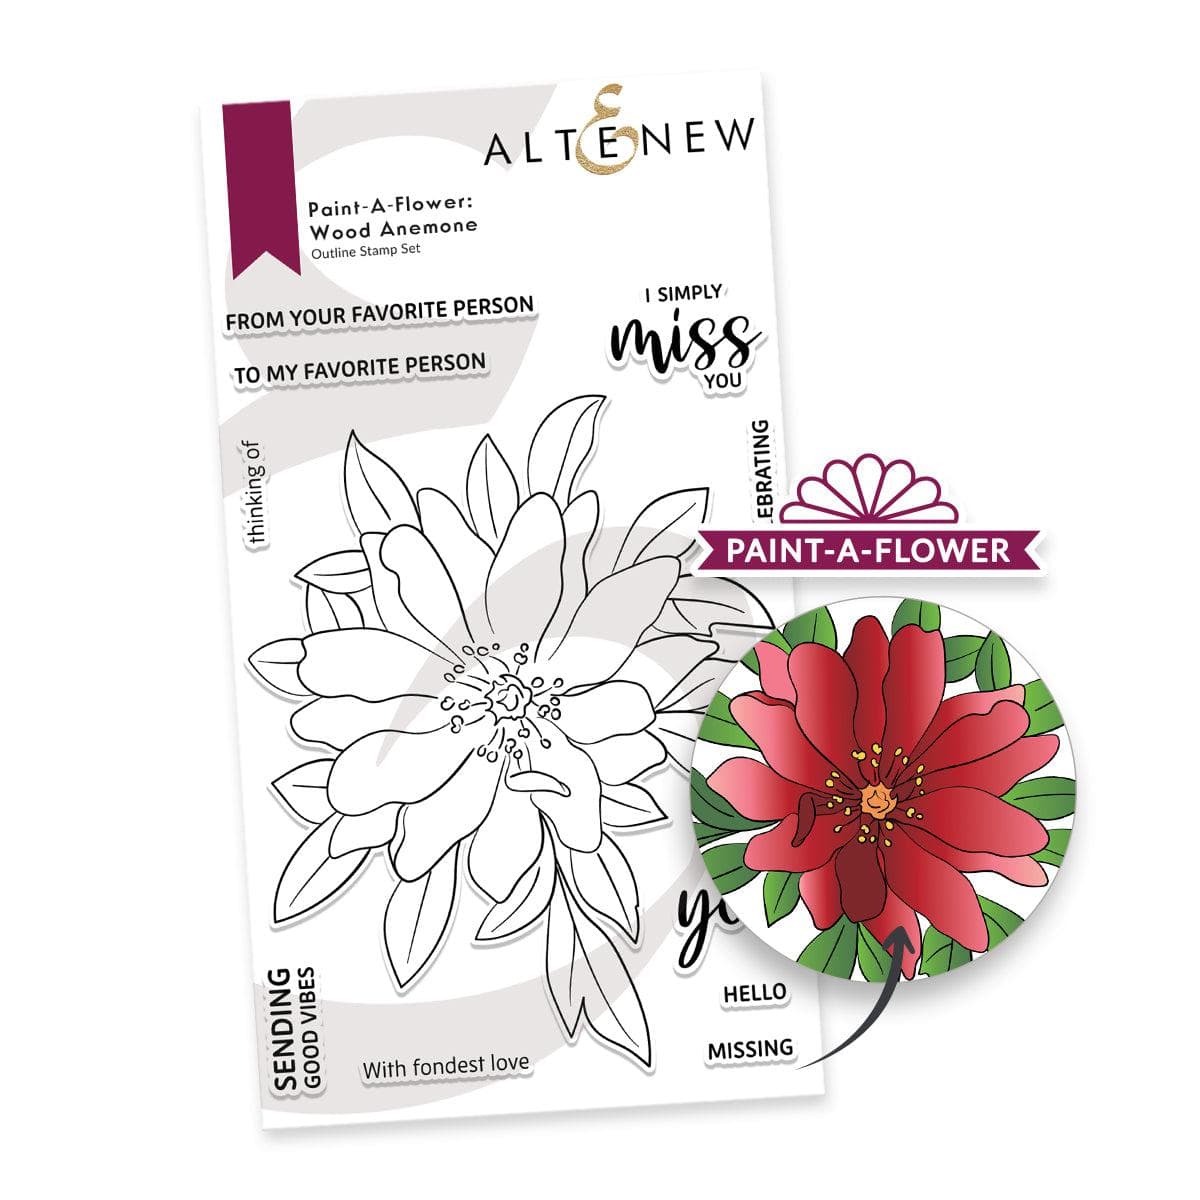 Altenew Paint-A-Flower: Wood Anemone Outline Stamp Set